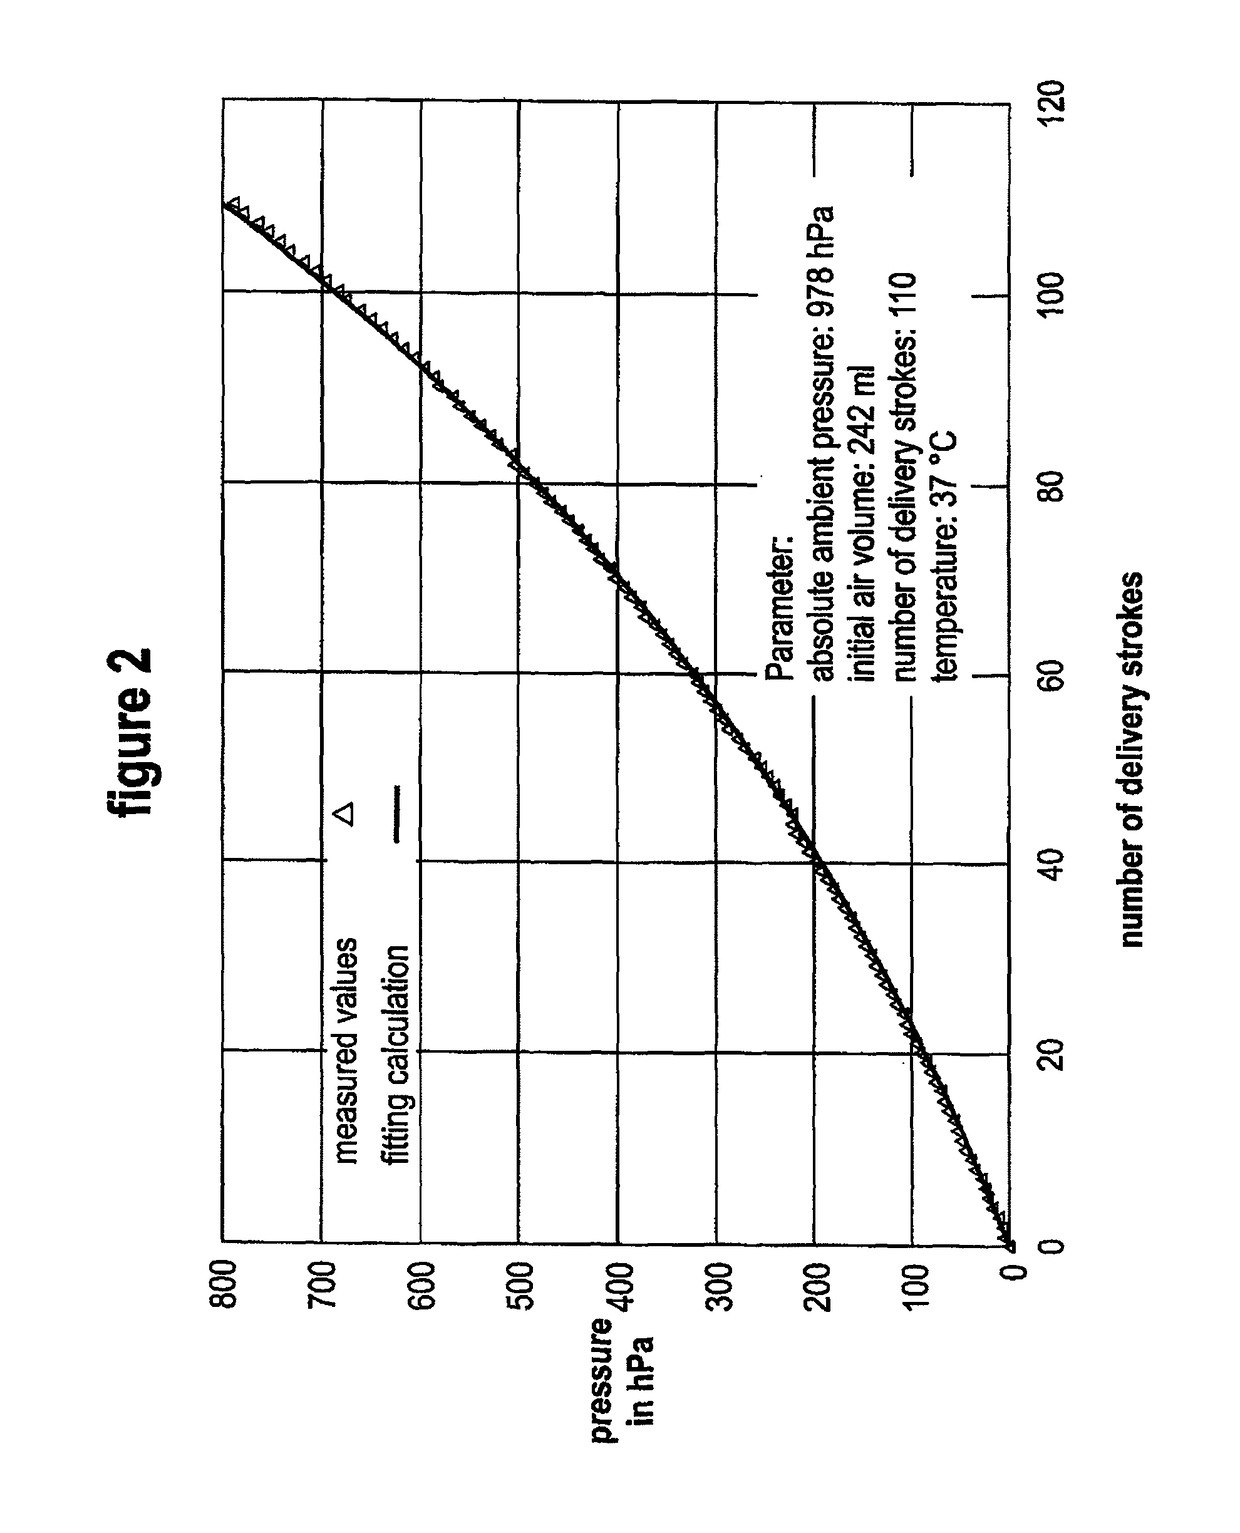 Method and device for determining at least one operating parameter of a device for extracorporeal blood treatment as a function of absolute pressure; the device for extracorporeal blood treatment